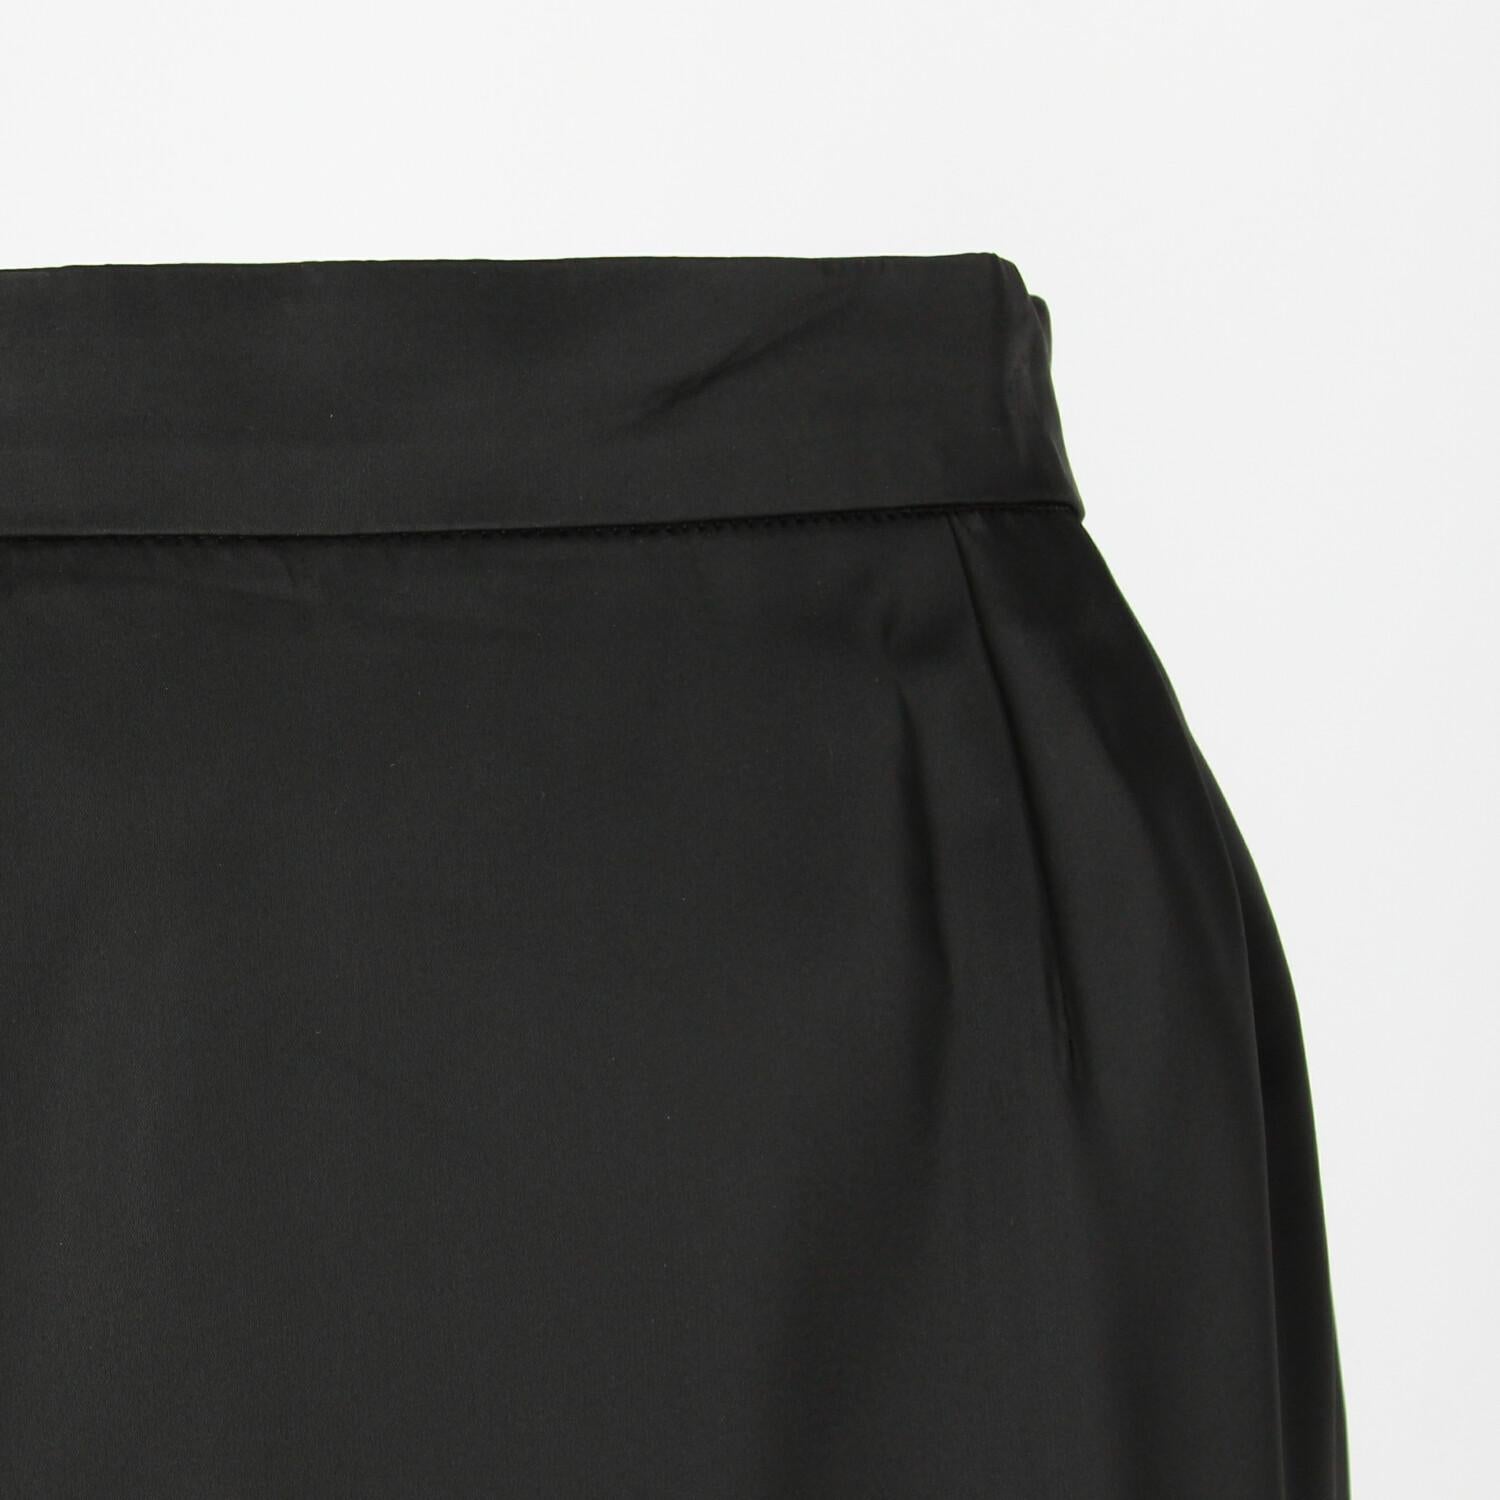 1980s Yves Saint Laurent Silk Skirt In Excellent Condition For Sale In Lugo (RA), IT